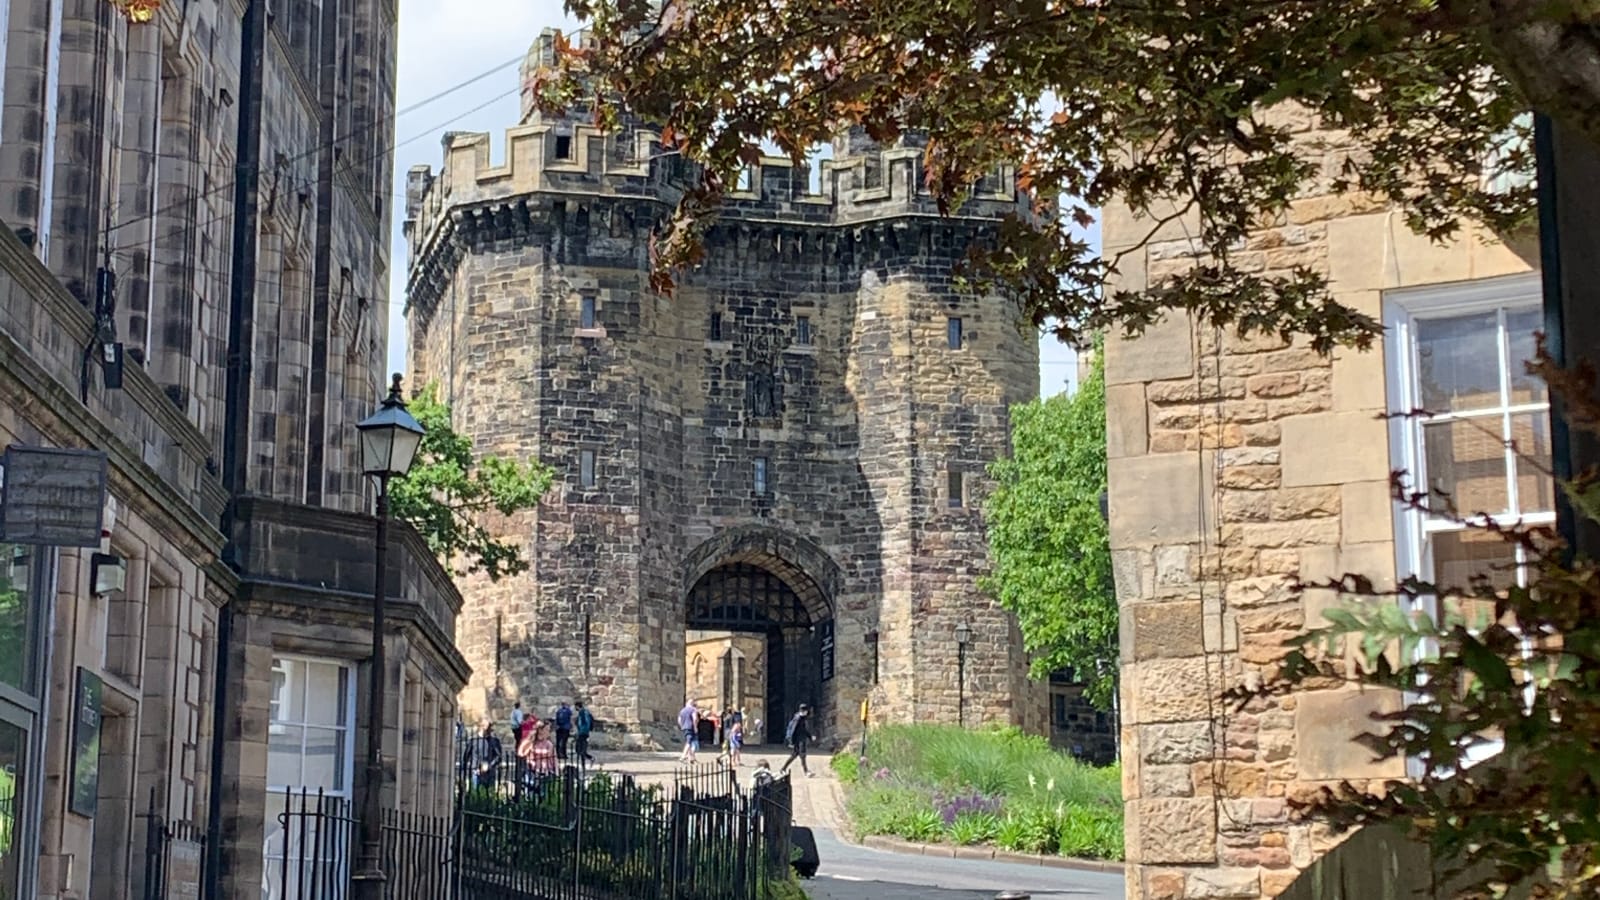 The front gate of Lancaster Castle as viewed from near the Storey